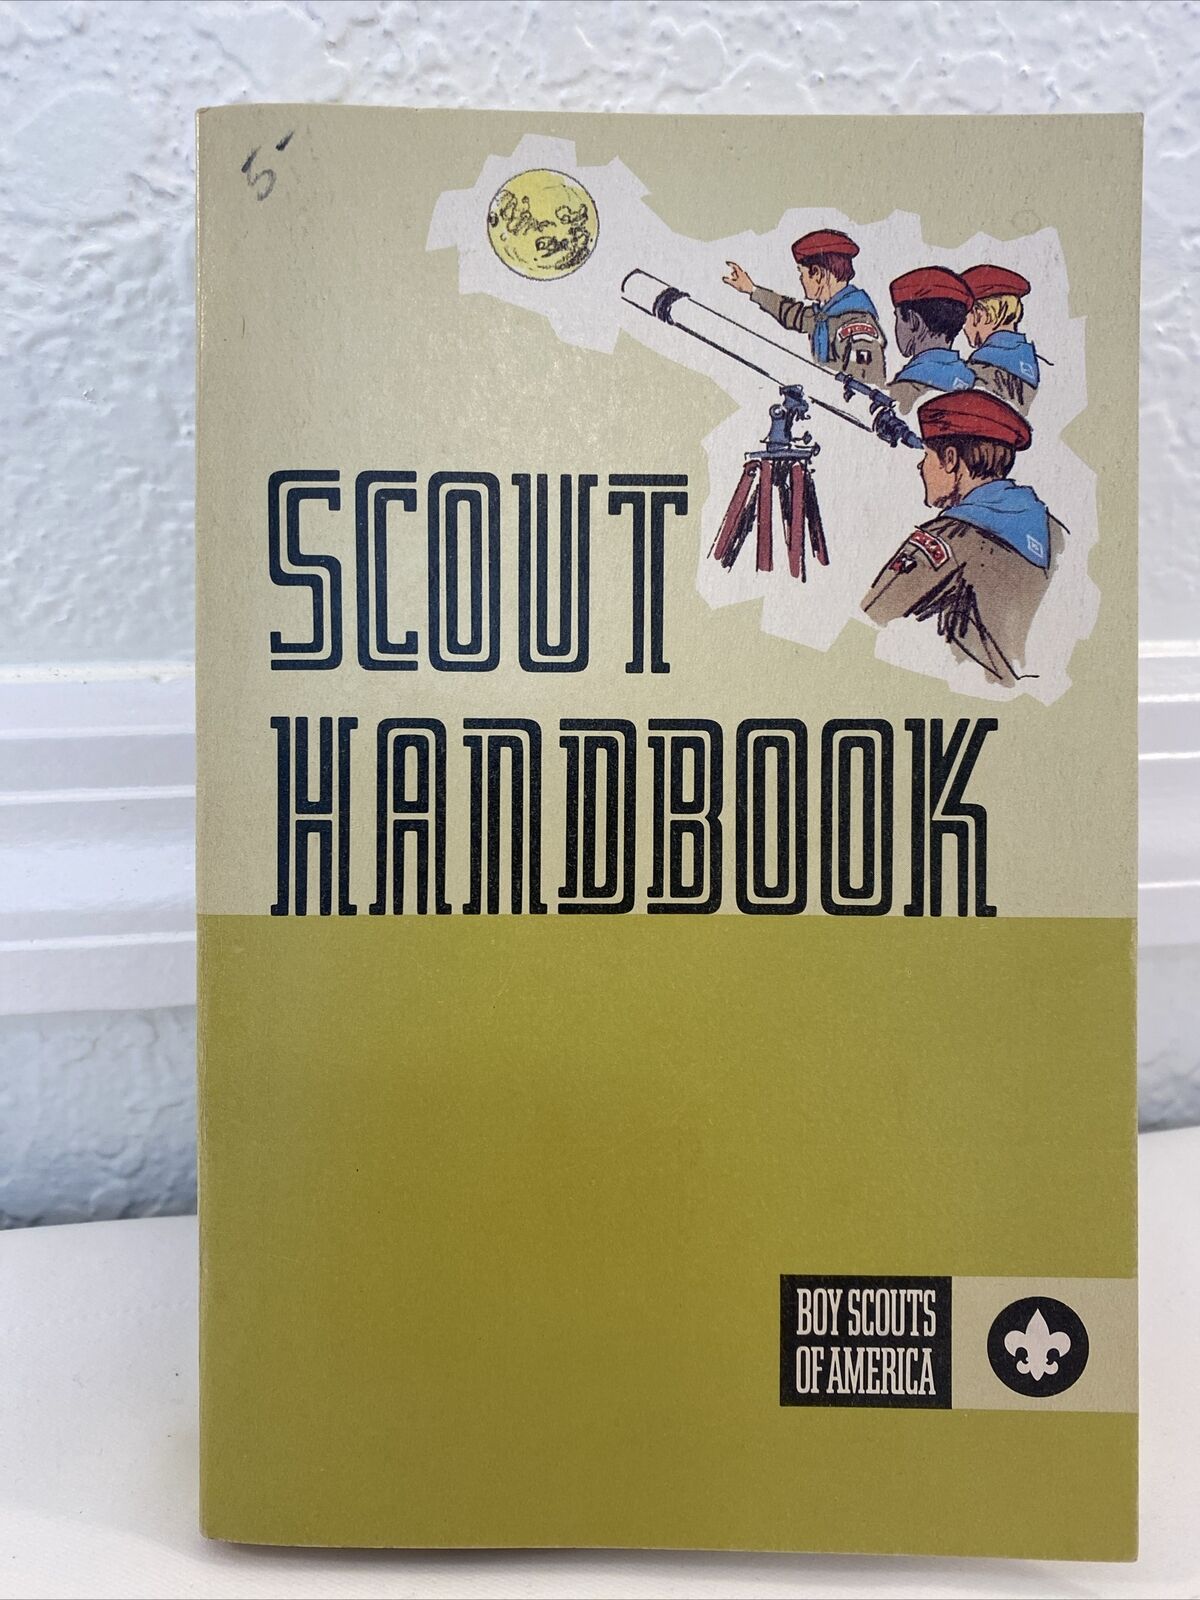 BSA Scout Handbook 8th Edition 3rd Printing 1975 Paperback BS-740